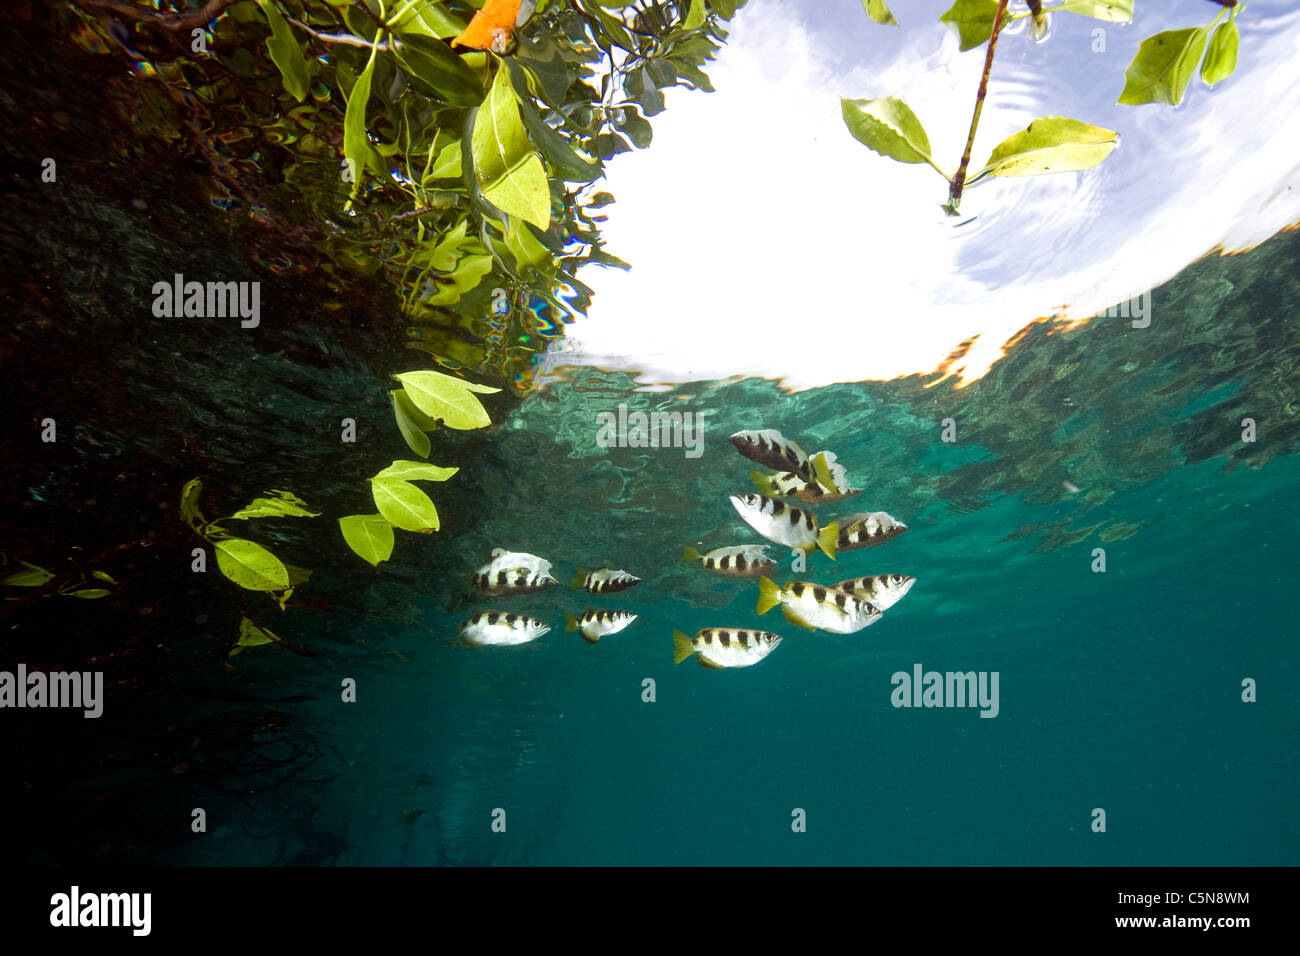 Banded Archerfishes hiding in Mangroves, Toxotes jaculatrix, Raja Ampat, West Papua, Indonesia Stock Photo